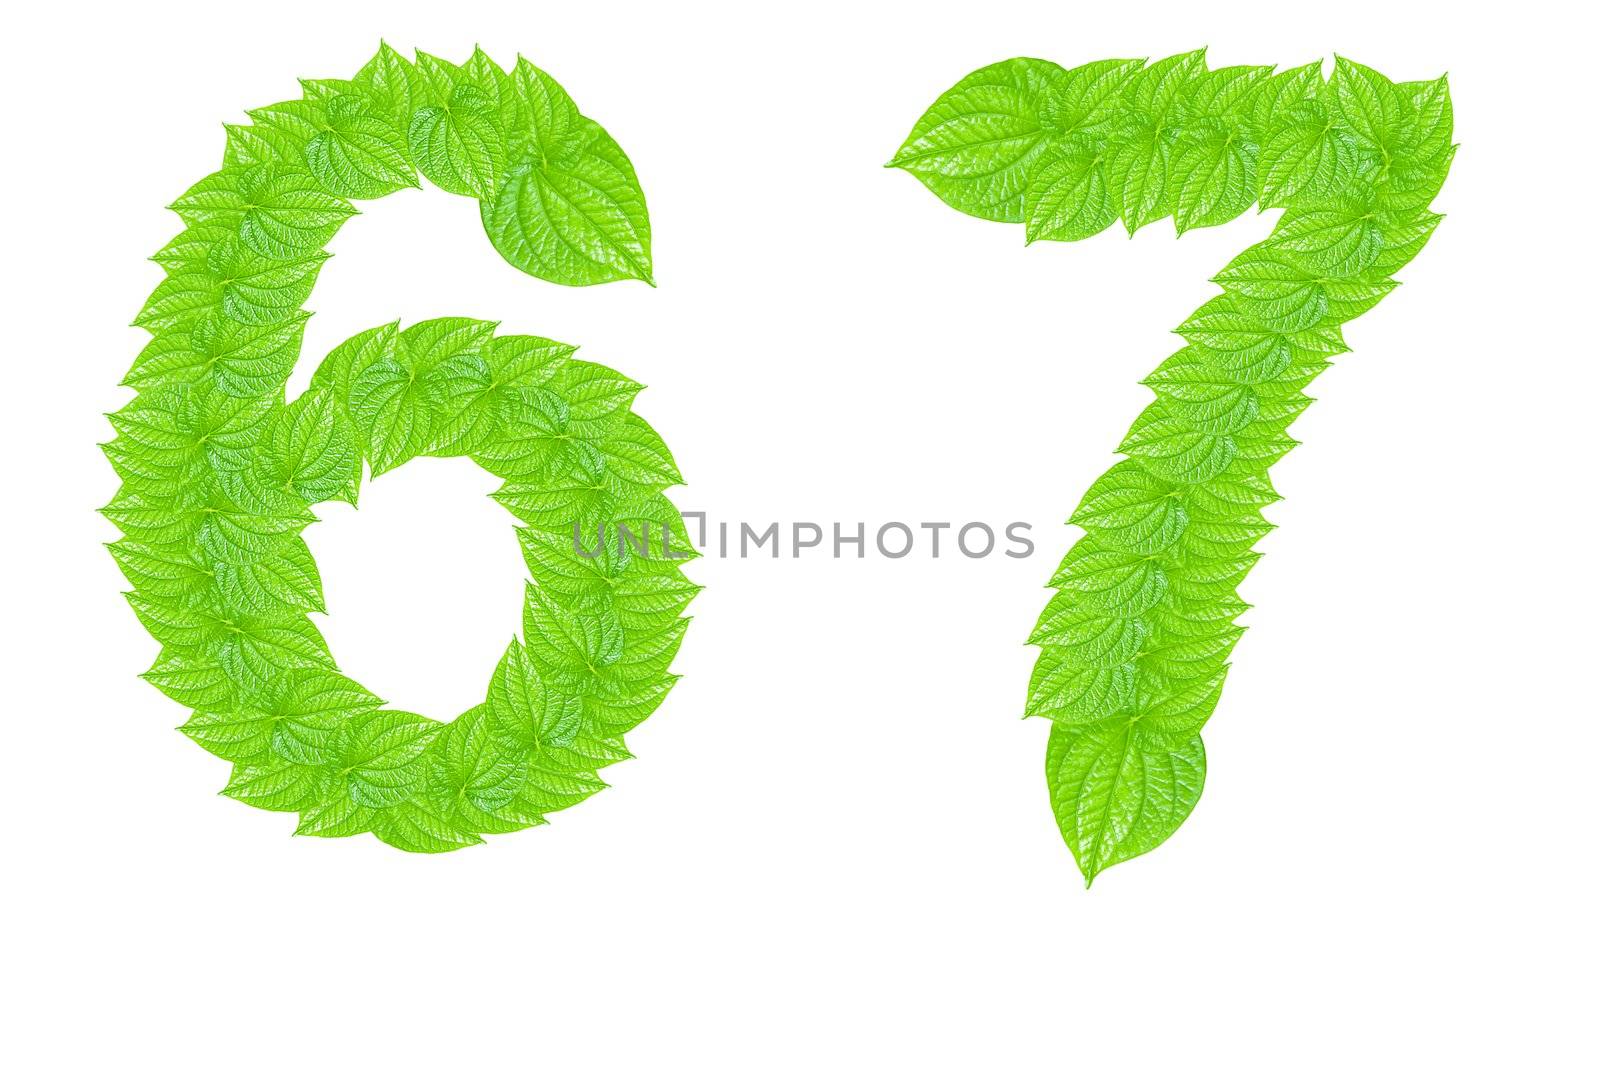 Number sign made from green leafs by sasilsolutions